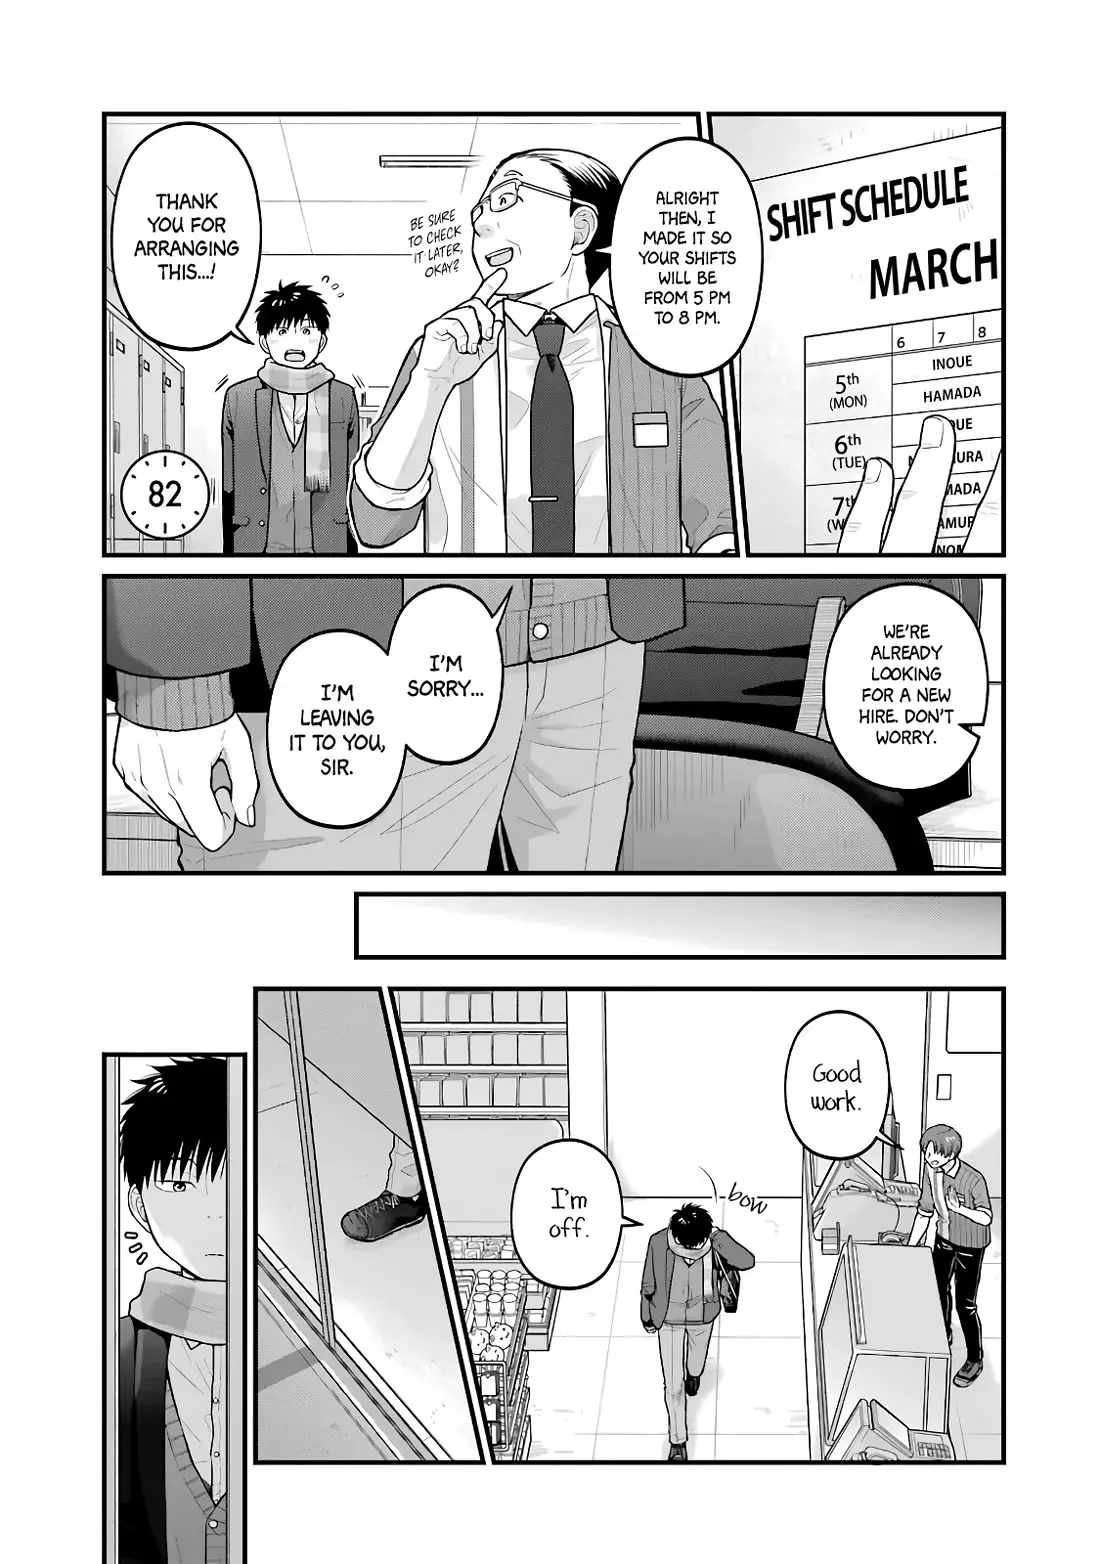 5 Minutes With You At A Convenience Store - 82 page 1-1c2fd5d1